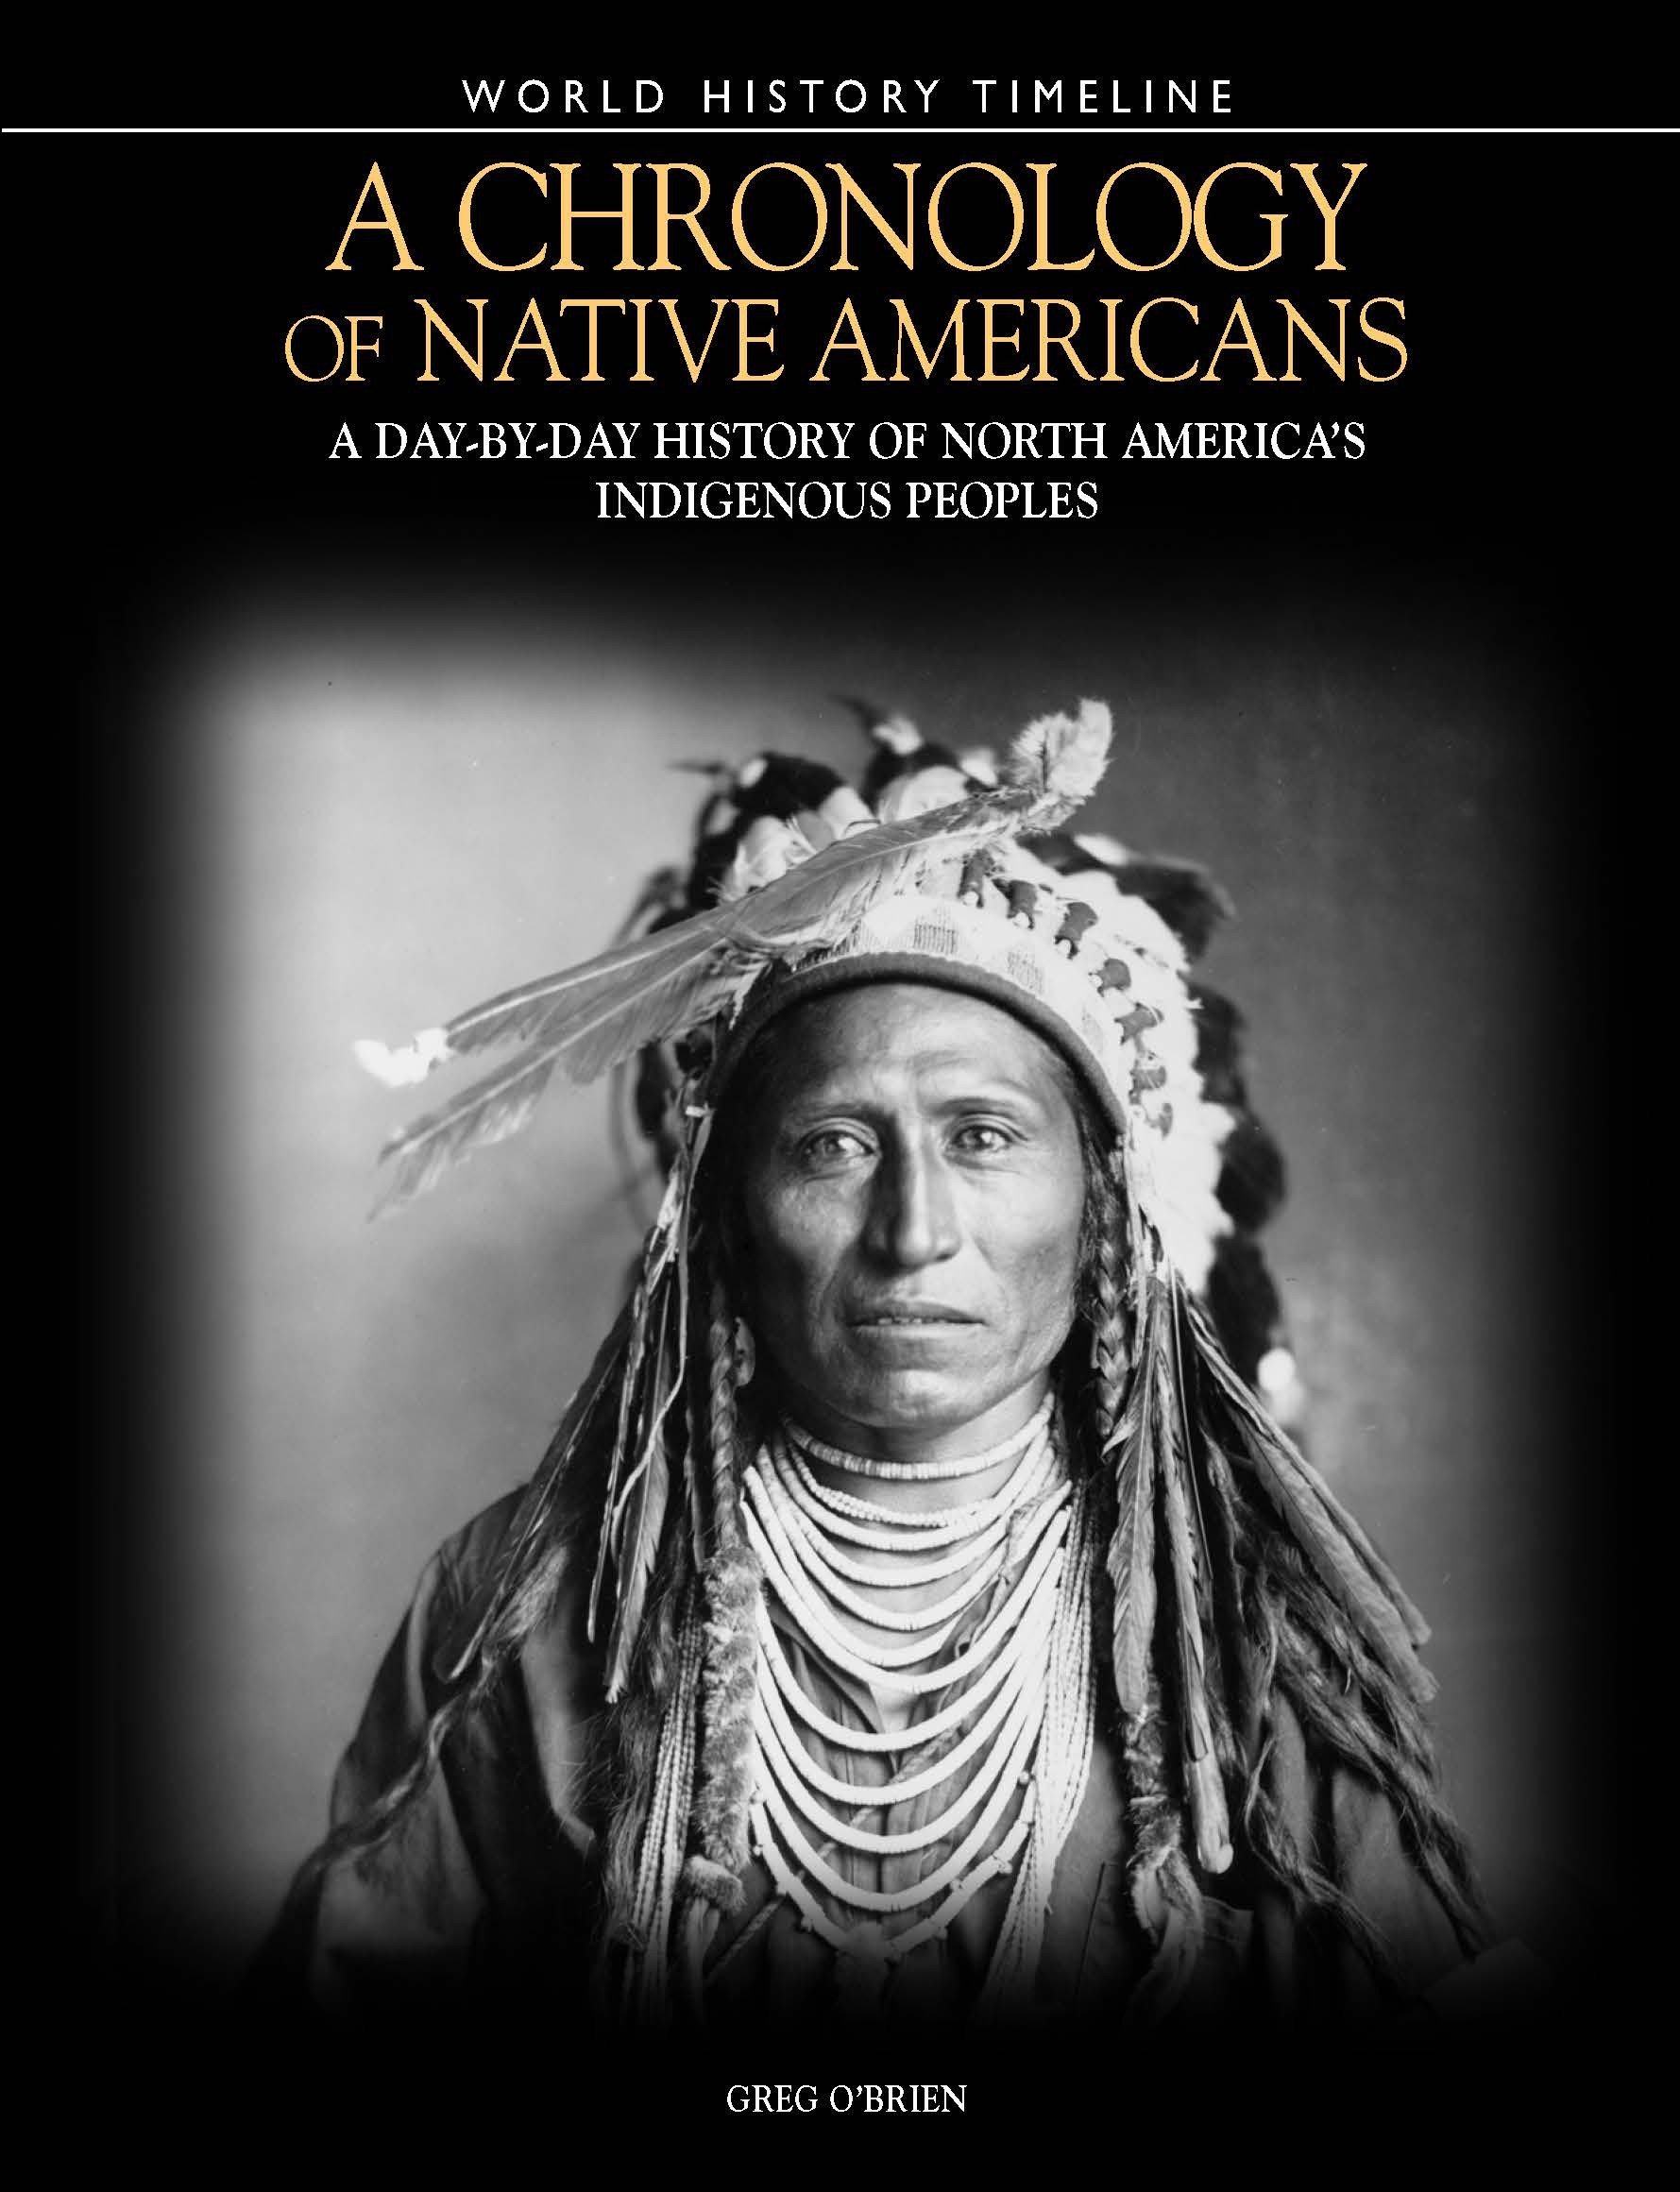 A Chronology of Native Americans